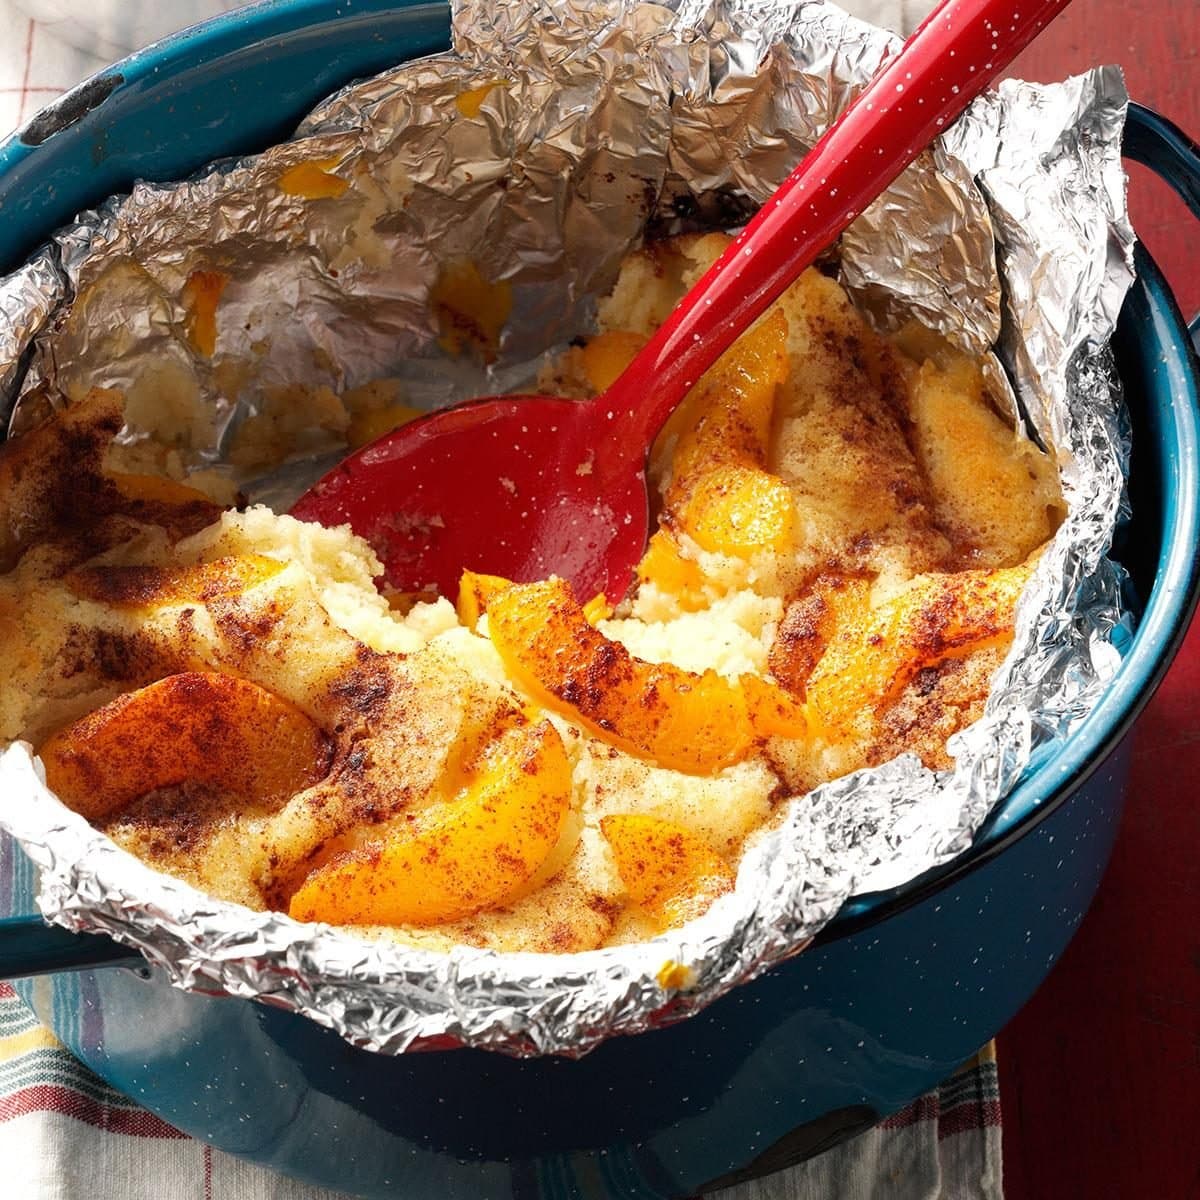 Peach cobbler cooked in a foil packet set in a bowl.